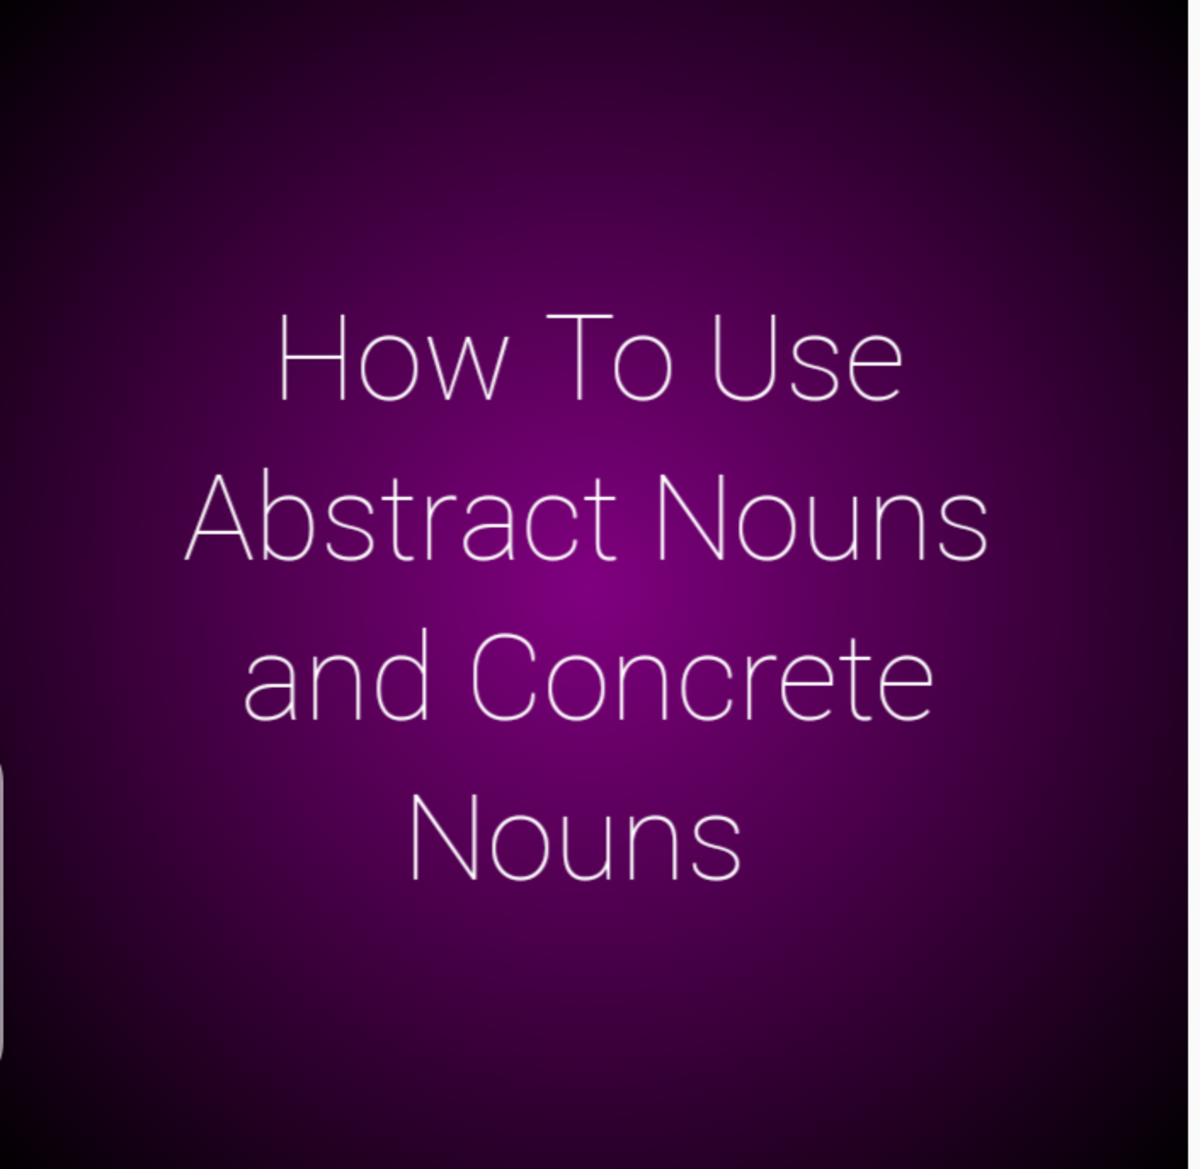 how-to-use-abstract-nouns-and-concrete-nouns-to-better-your-writing